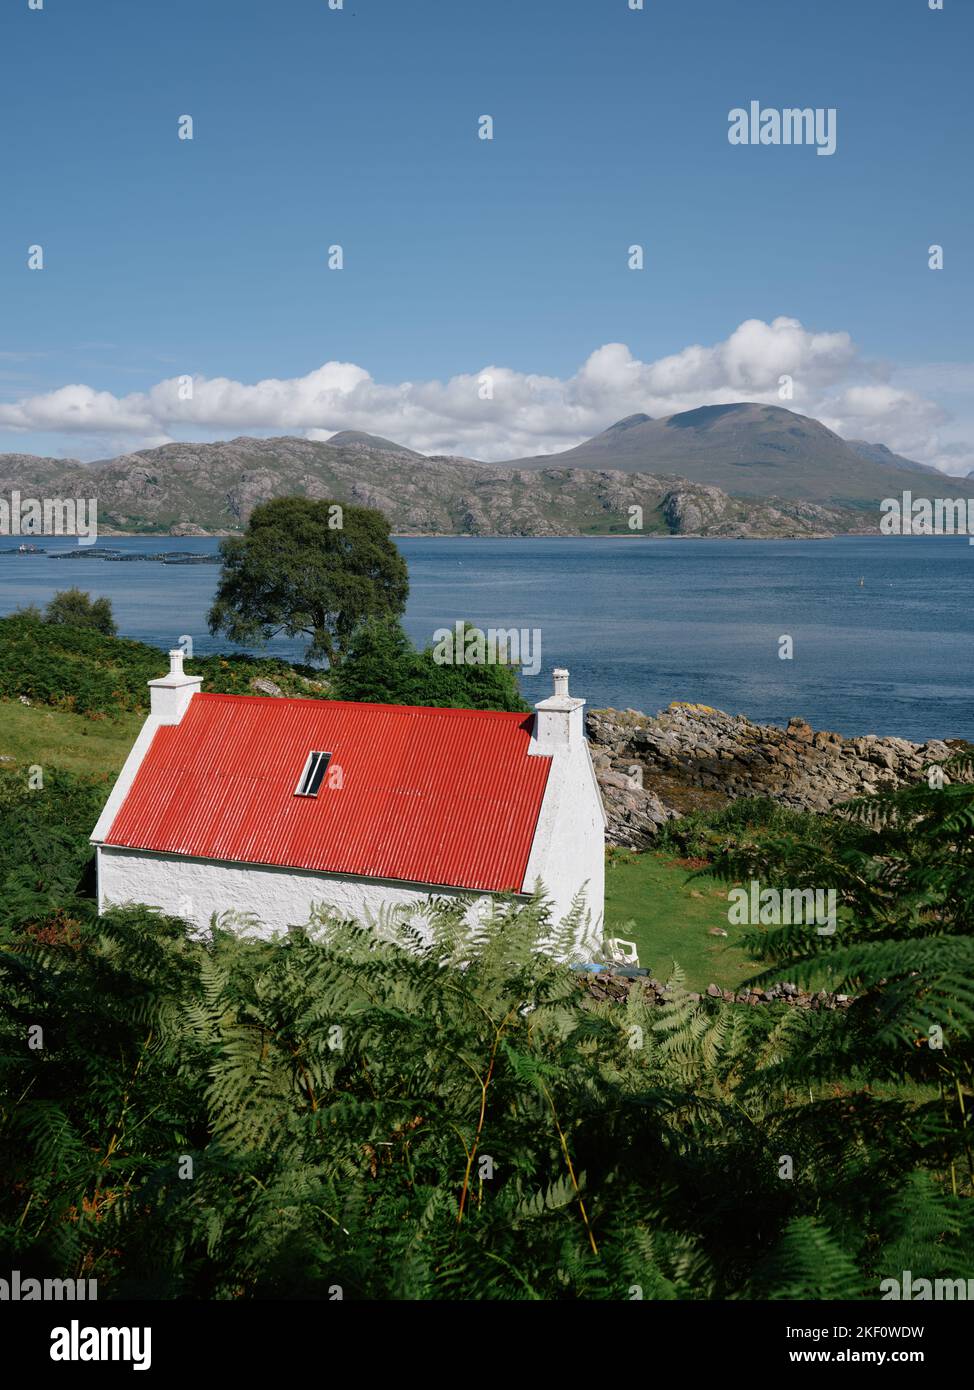 A red roofed white washed croft cottage overlooking Loch Shieldaig and the Torridon mountains landscape in Wester Ross, Scotland UK Stock Photo